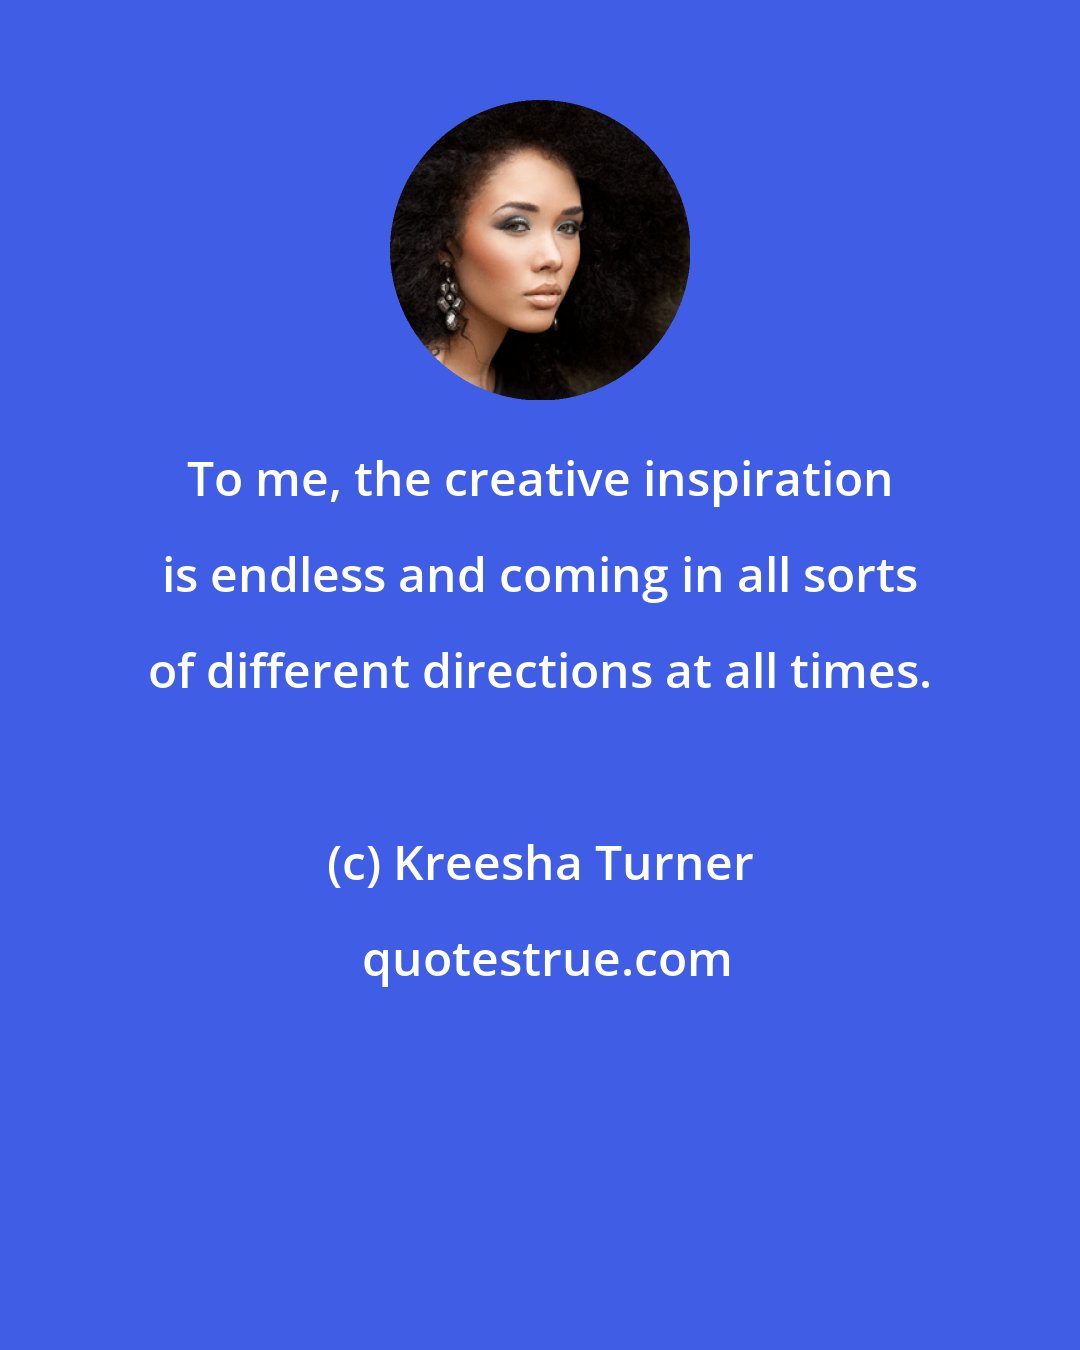 Kreesha Turner: To me, the creative inspiration is endless and coming in all sorts of different directions at all times.